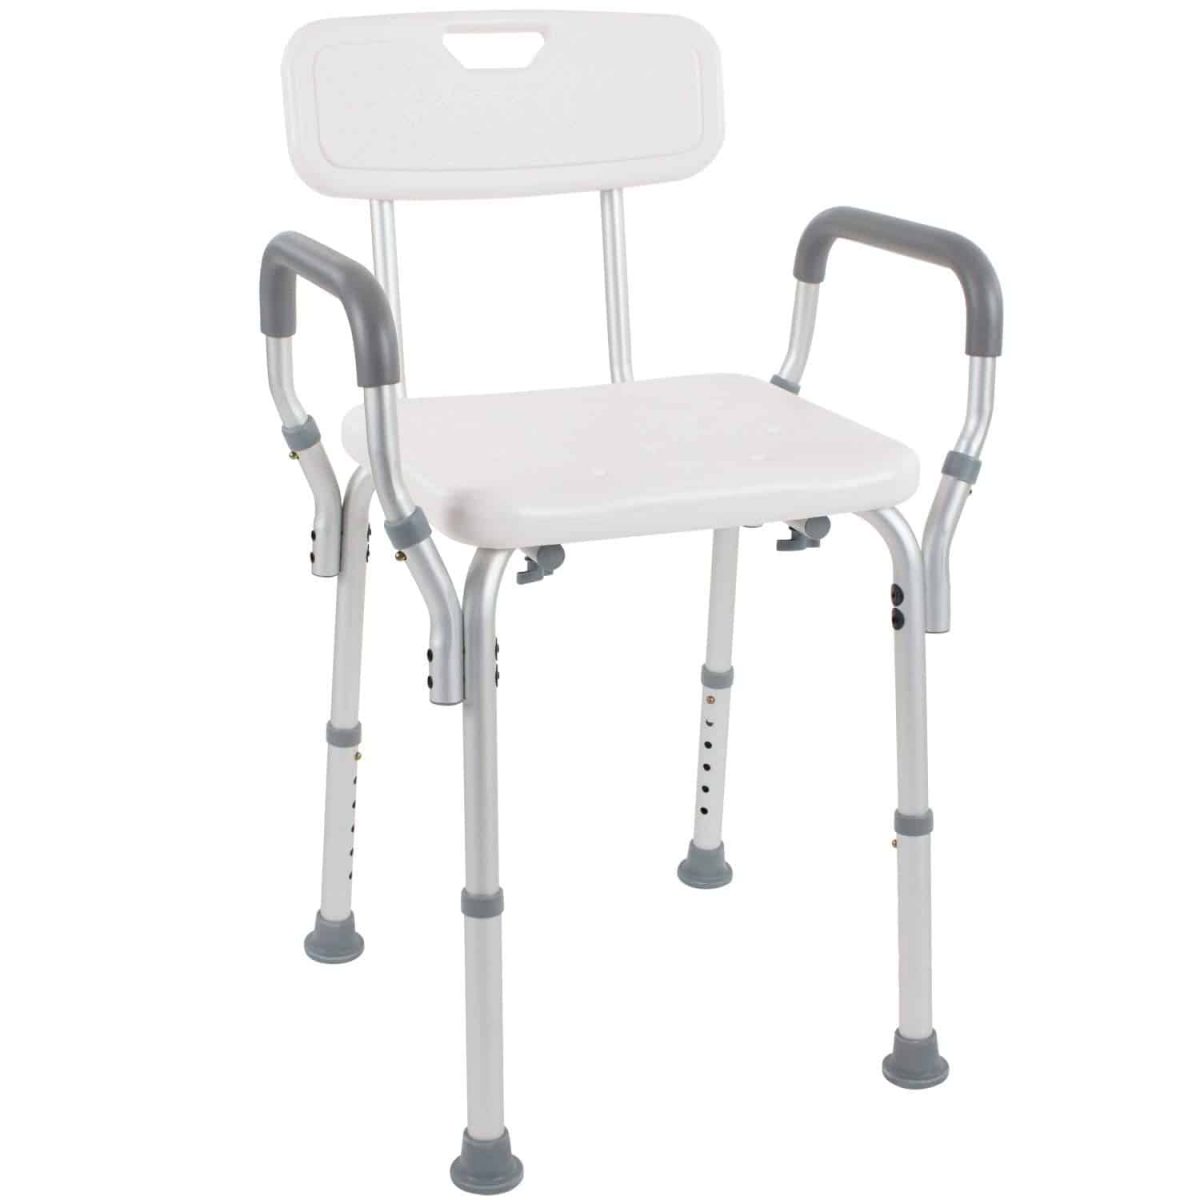 Top 10 Best Handicap Shower Chair with Arm and Back in 2022 Reviews